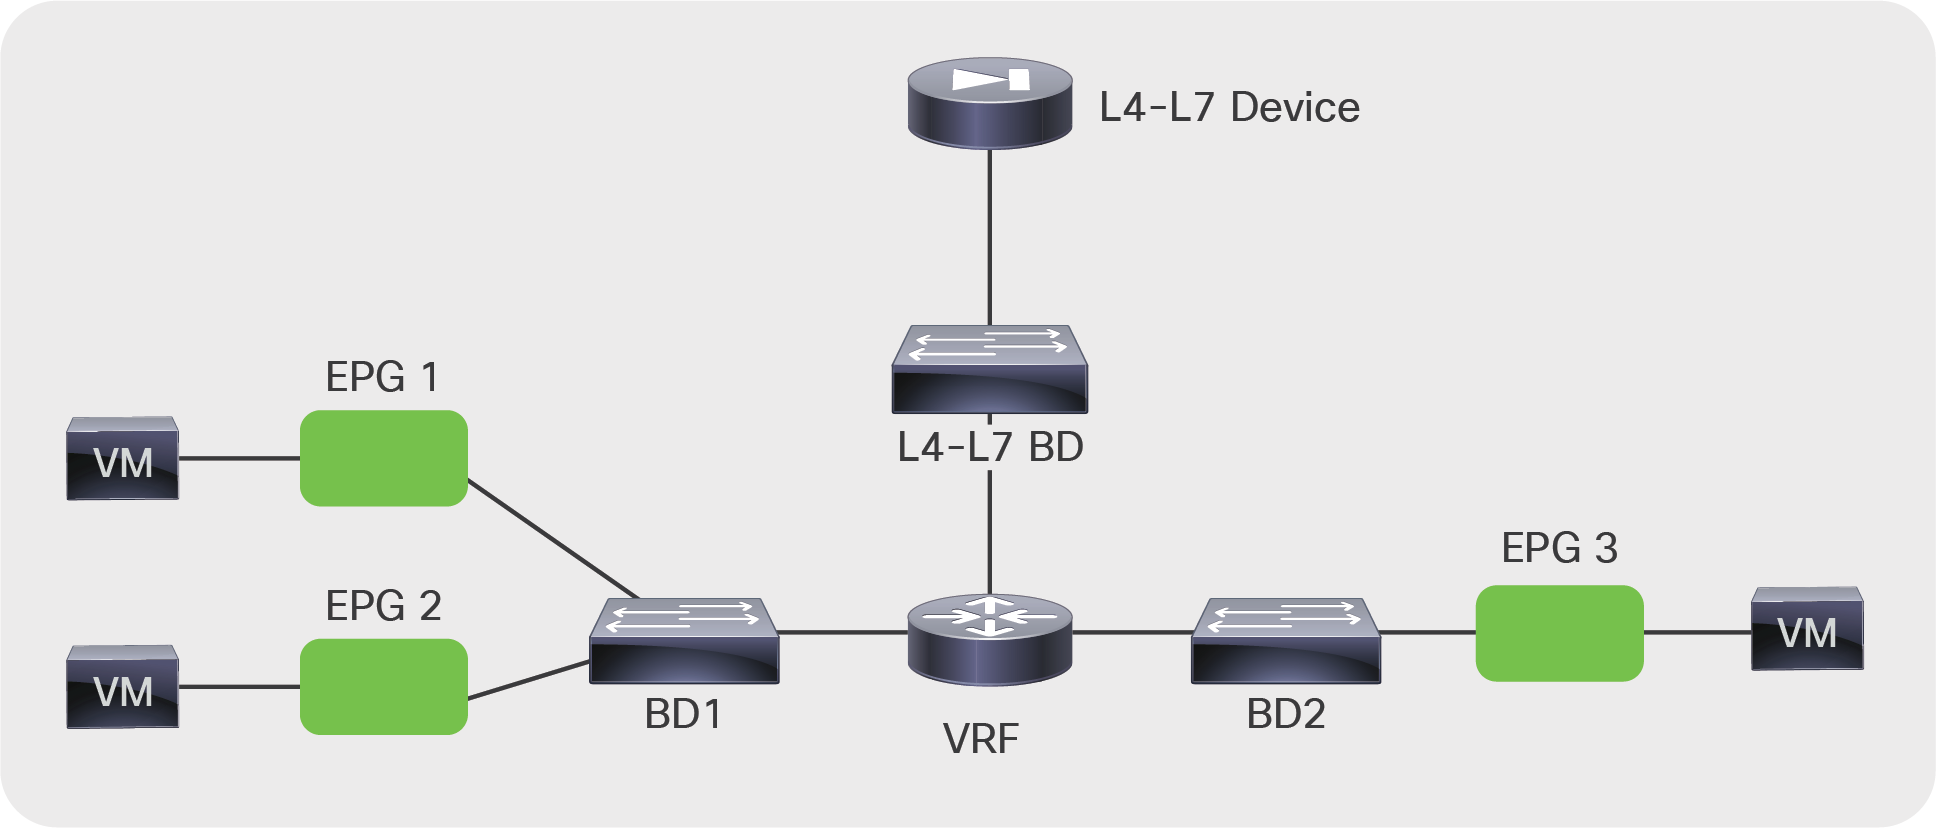 BD configuration for the deployment of an L4-L7 device in policy-based redirect (PBR) mode